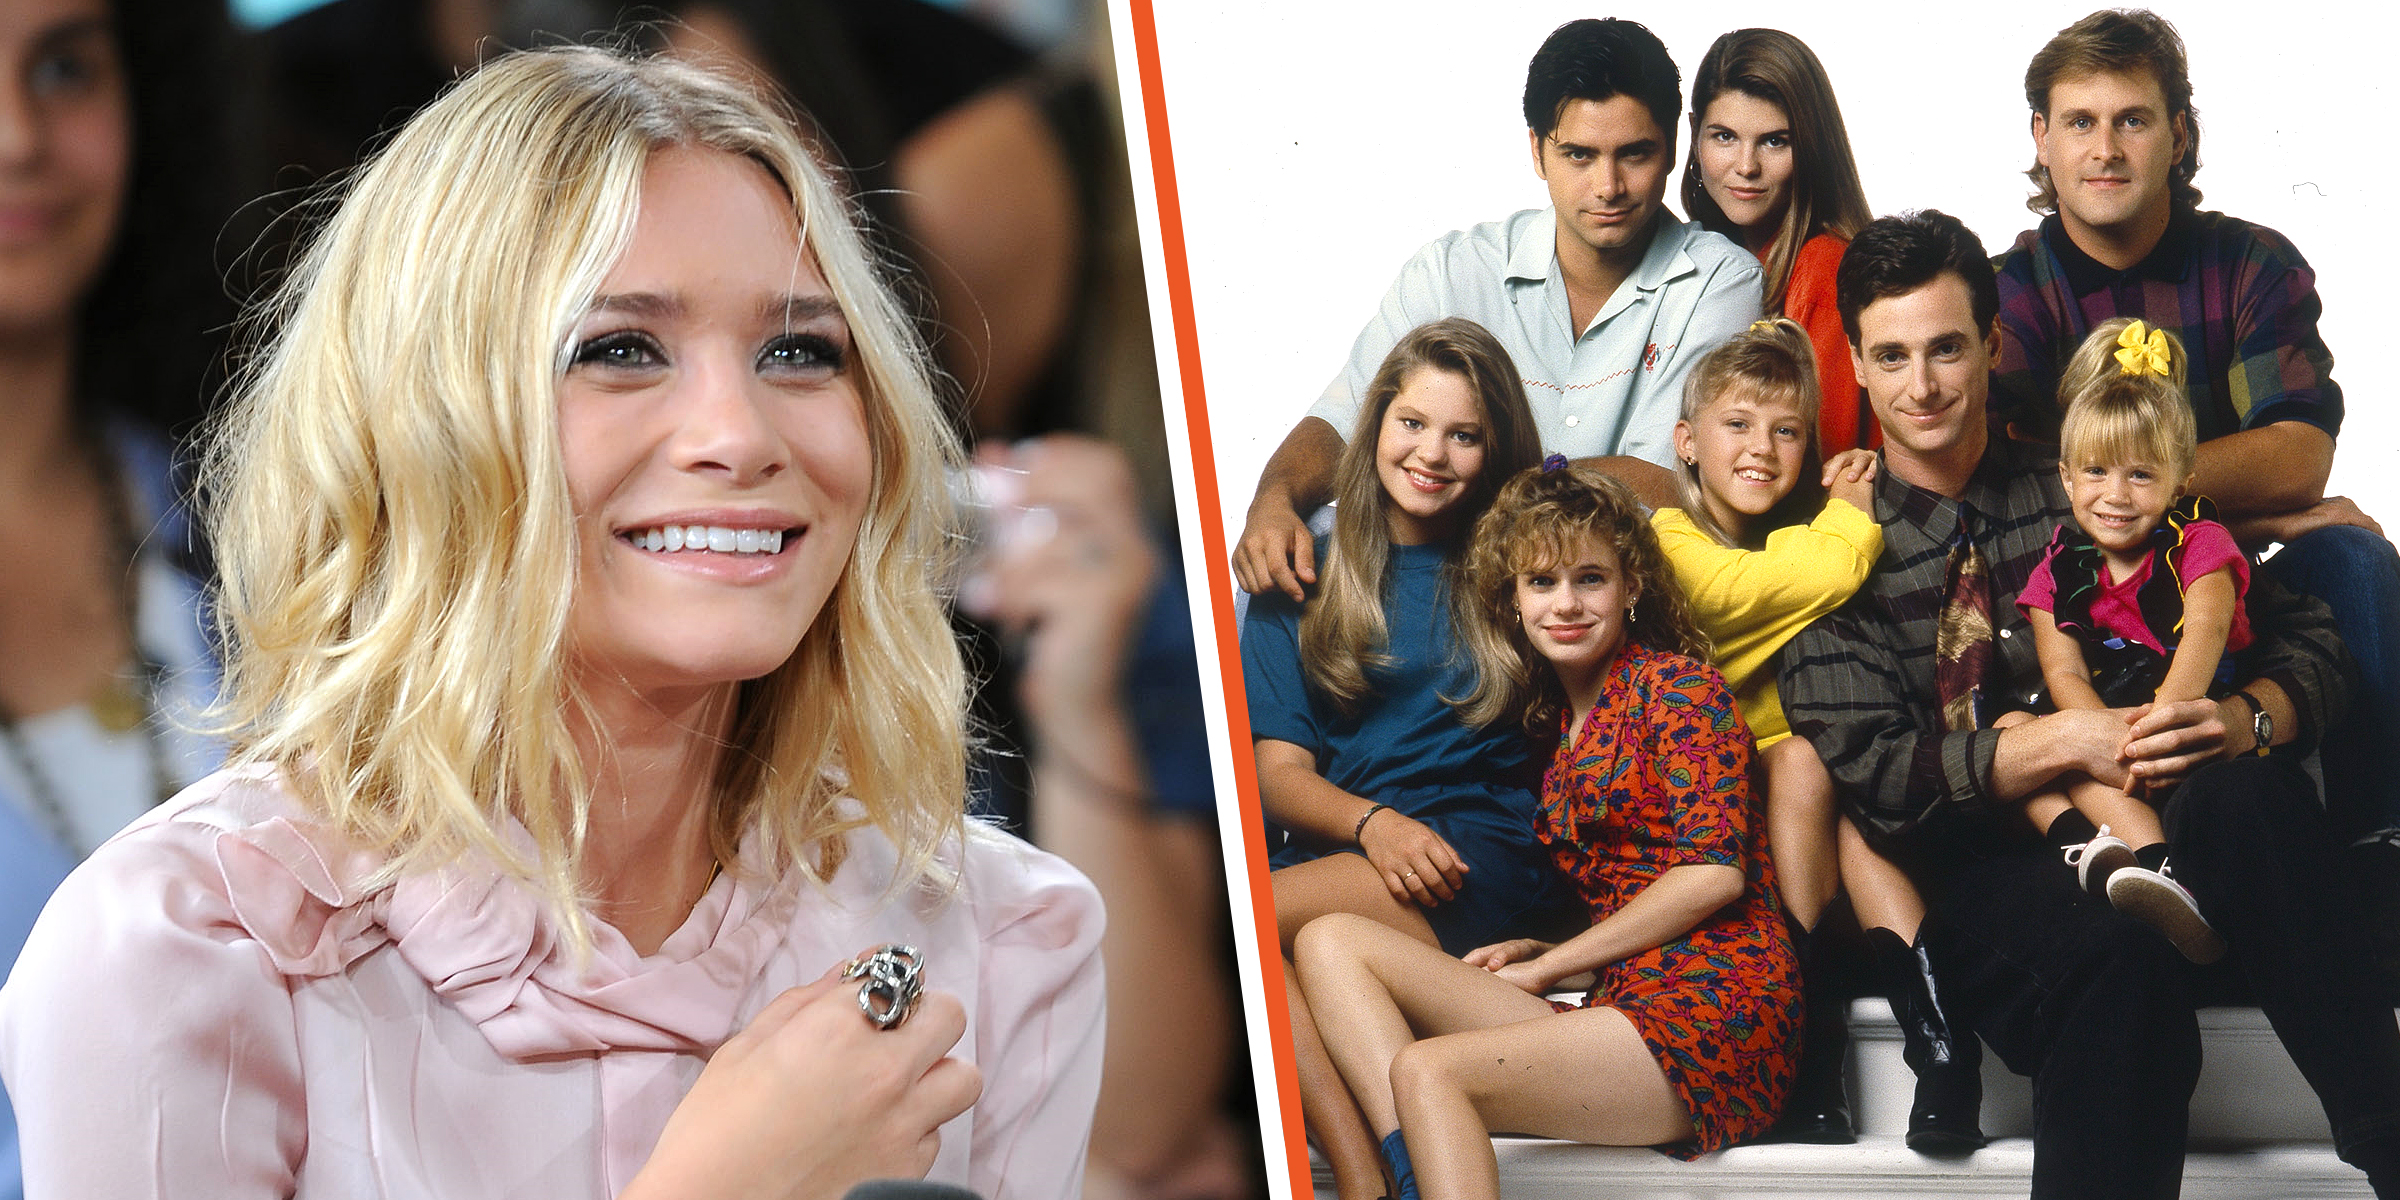 Ashley Olsen | The cast of "Full House." | Source: Getty Images